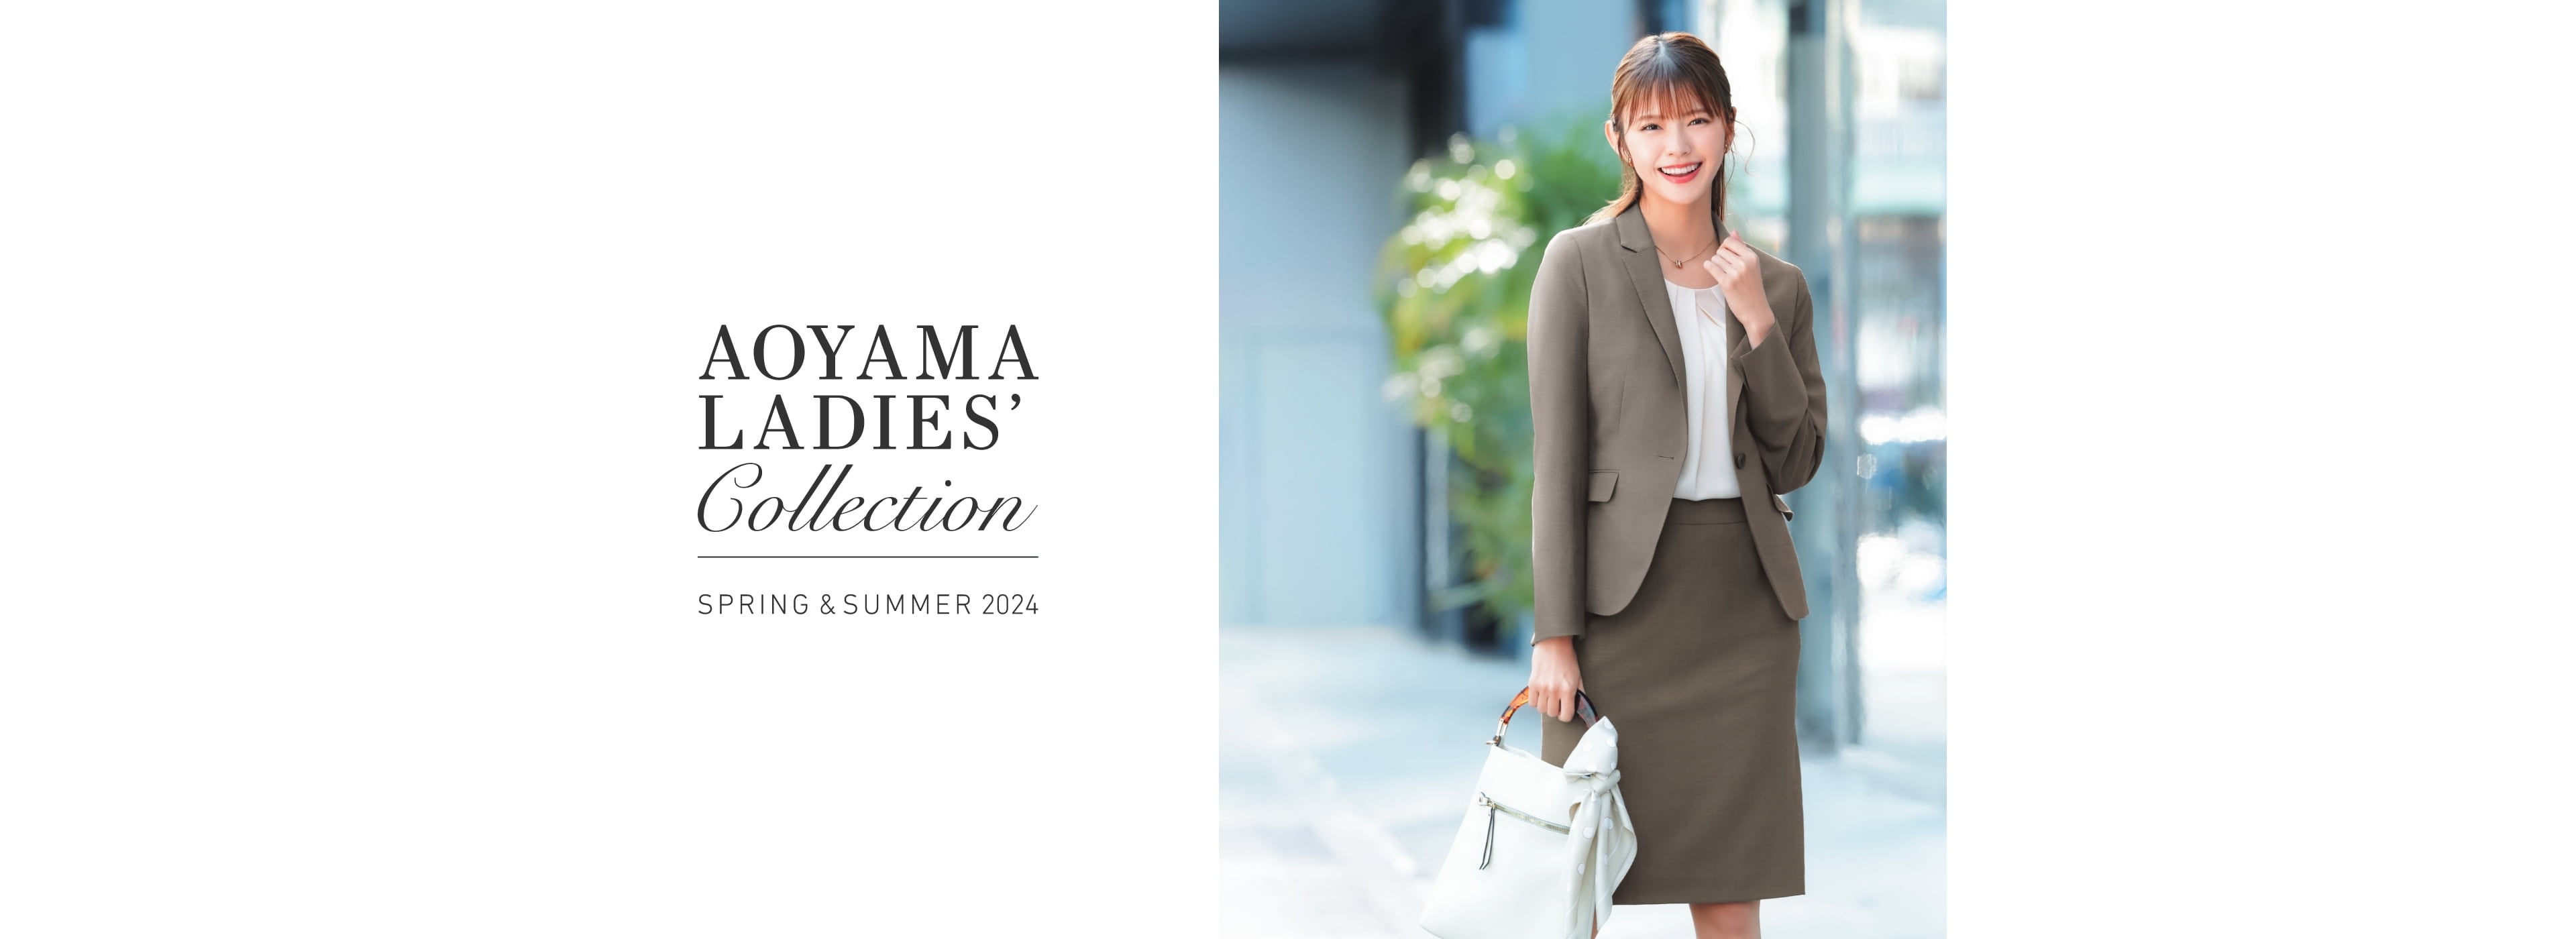 AOYAMA LADIES COLLECTION SPRING&SUMMER 2024